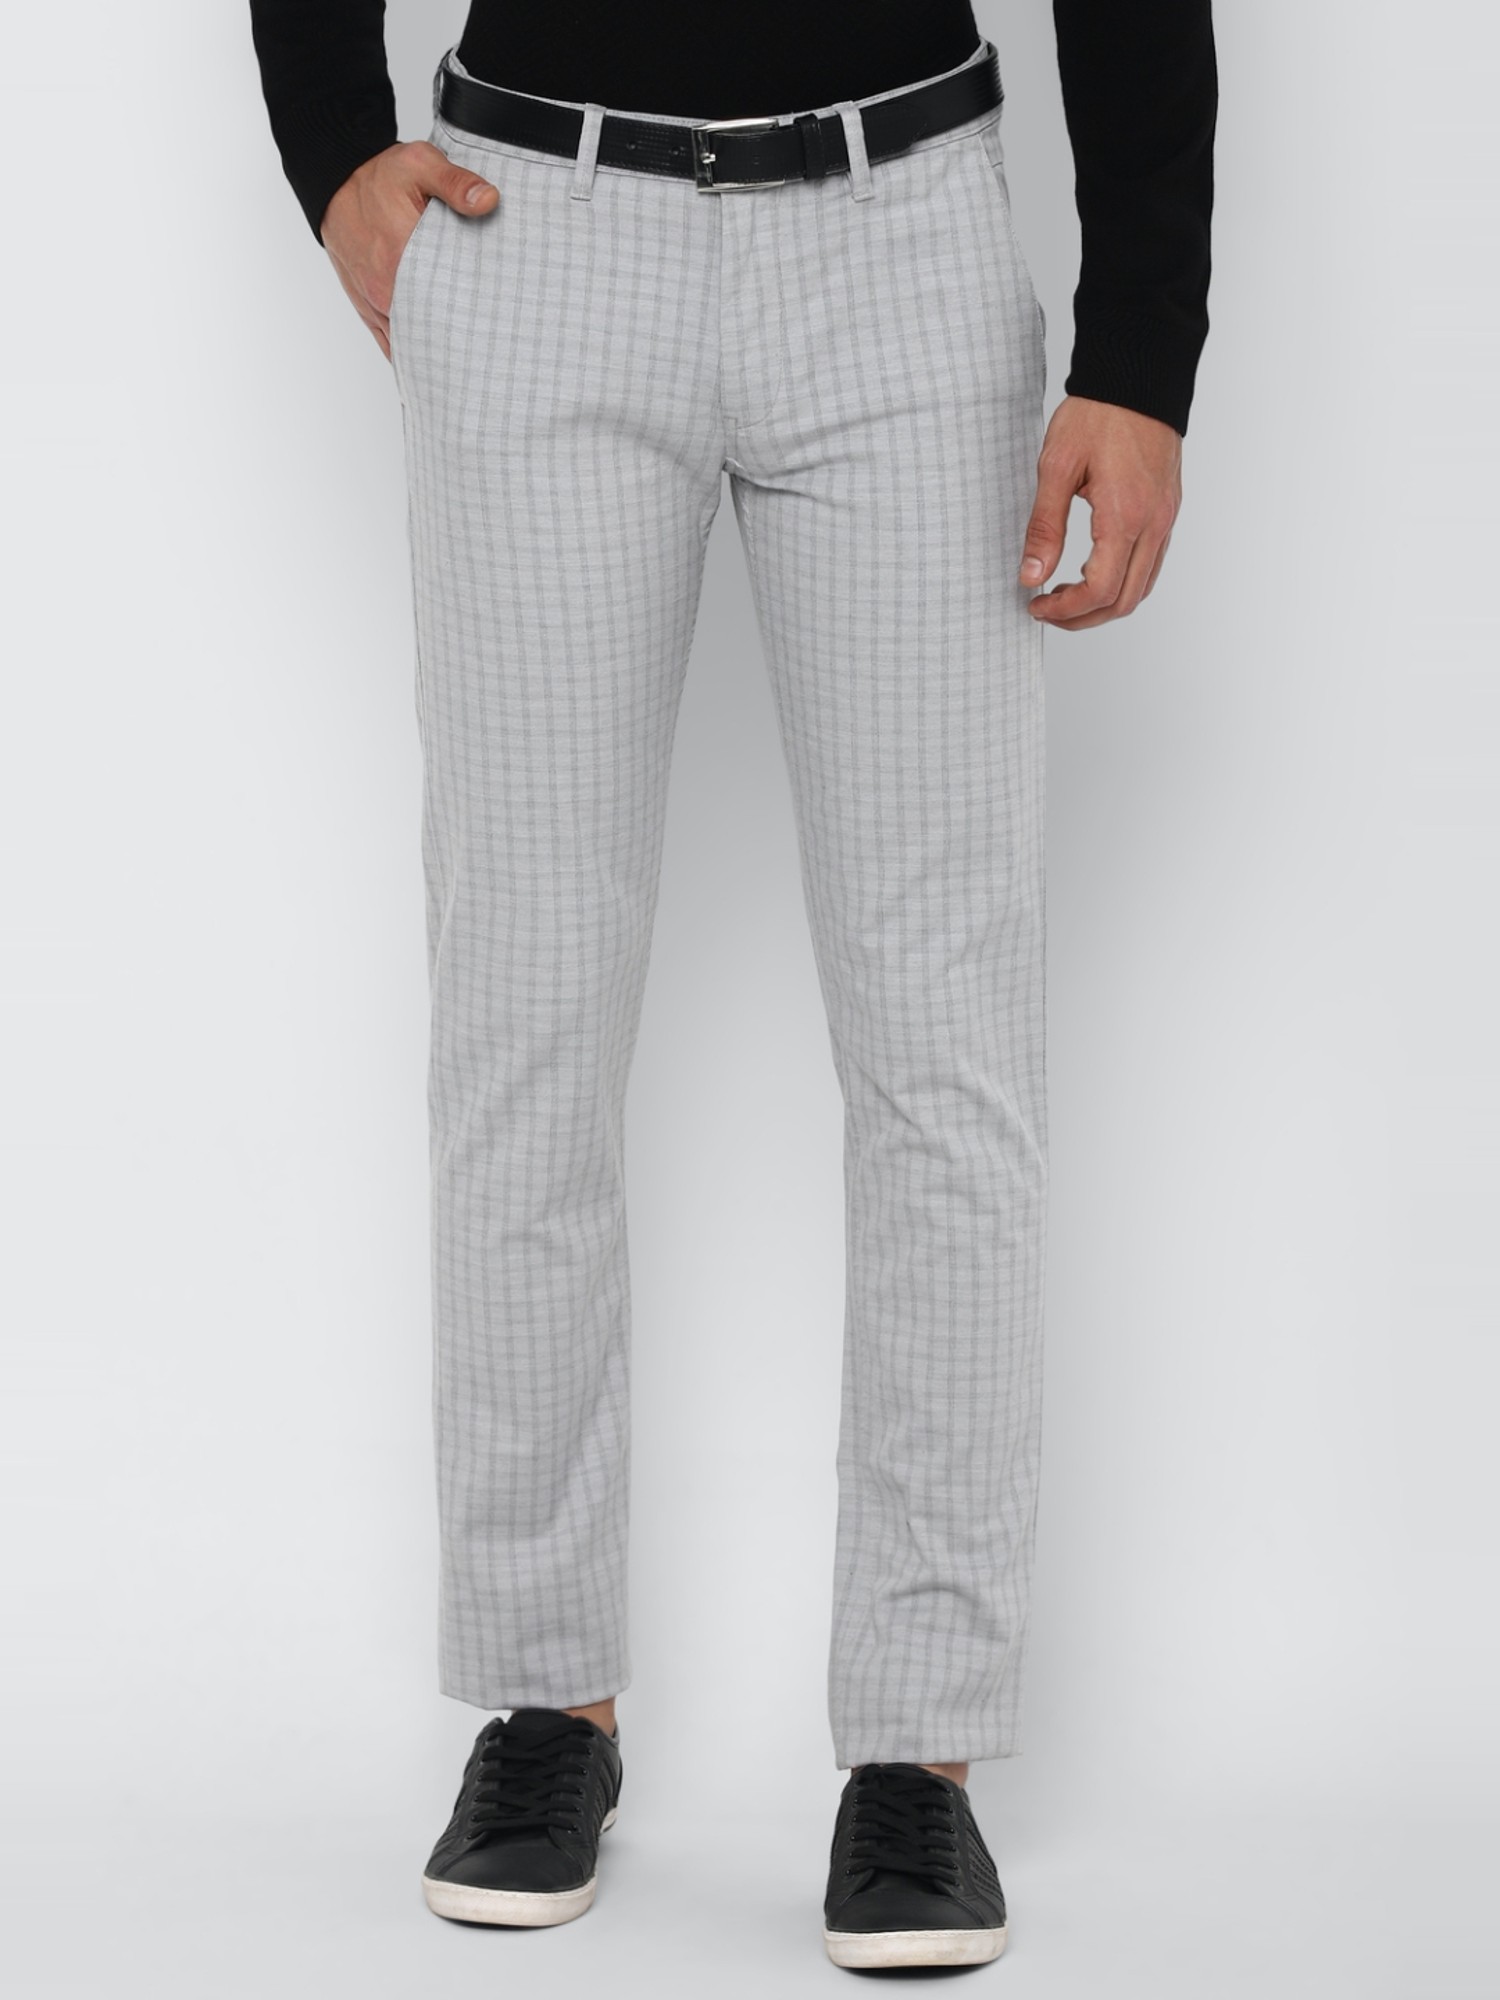 Louis Philippe Checks Grey Trousers Buy Louis Philippe Checks Grey Trousers  Online at Best Price in India  NykaaMan